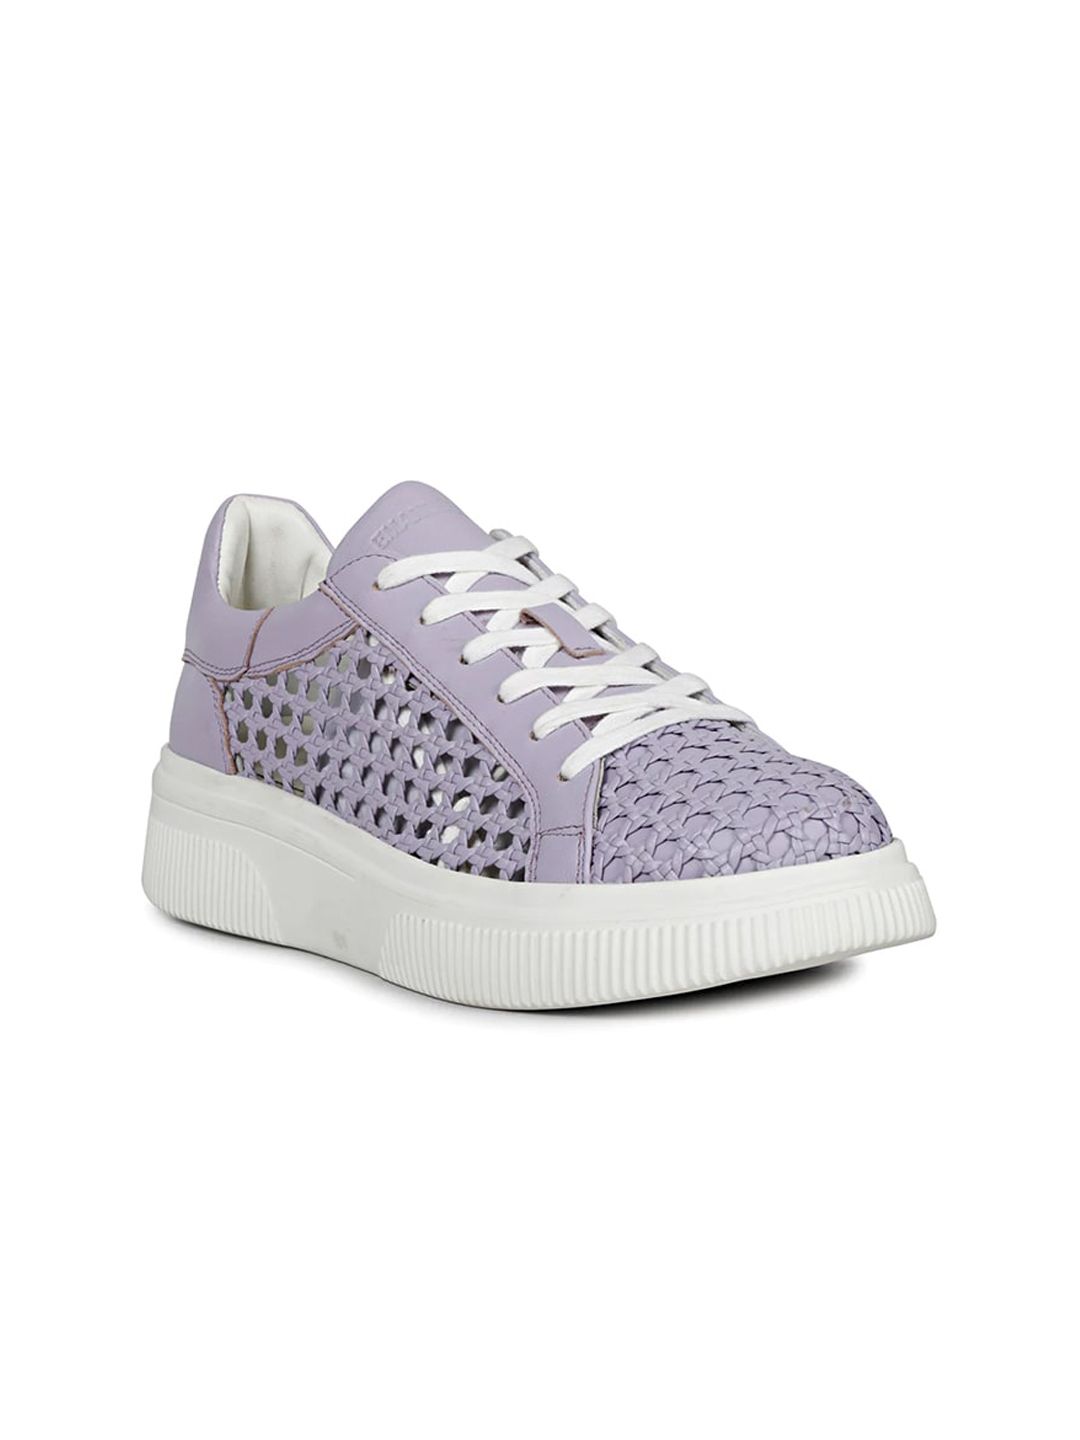 Saint G Women Woven Design Leather Sneakers Price in India